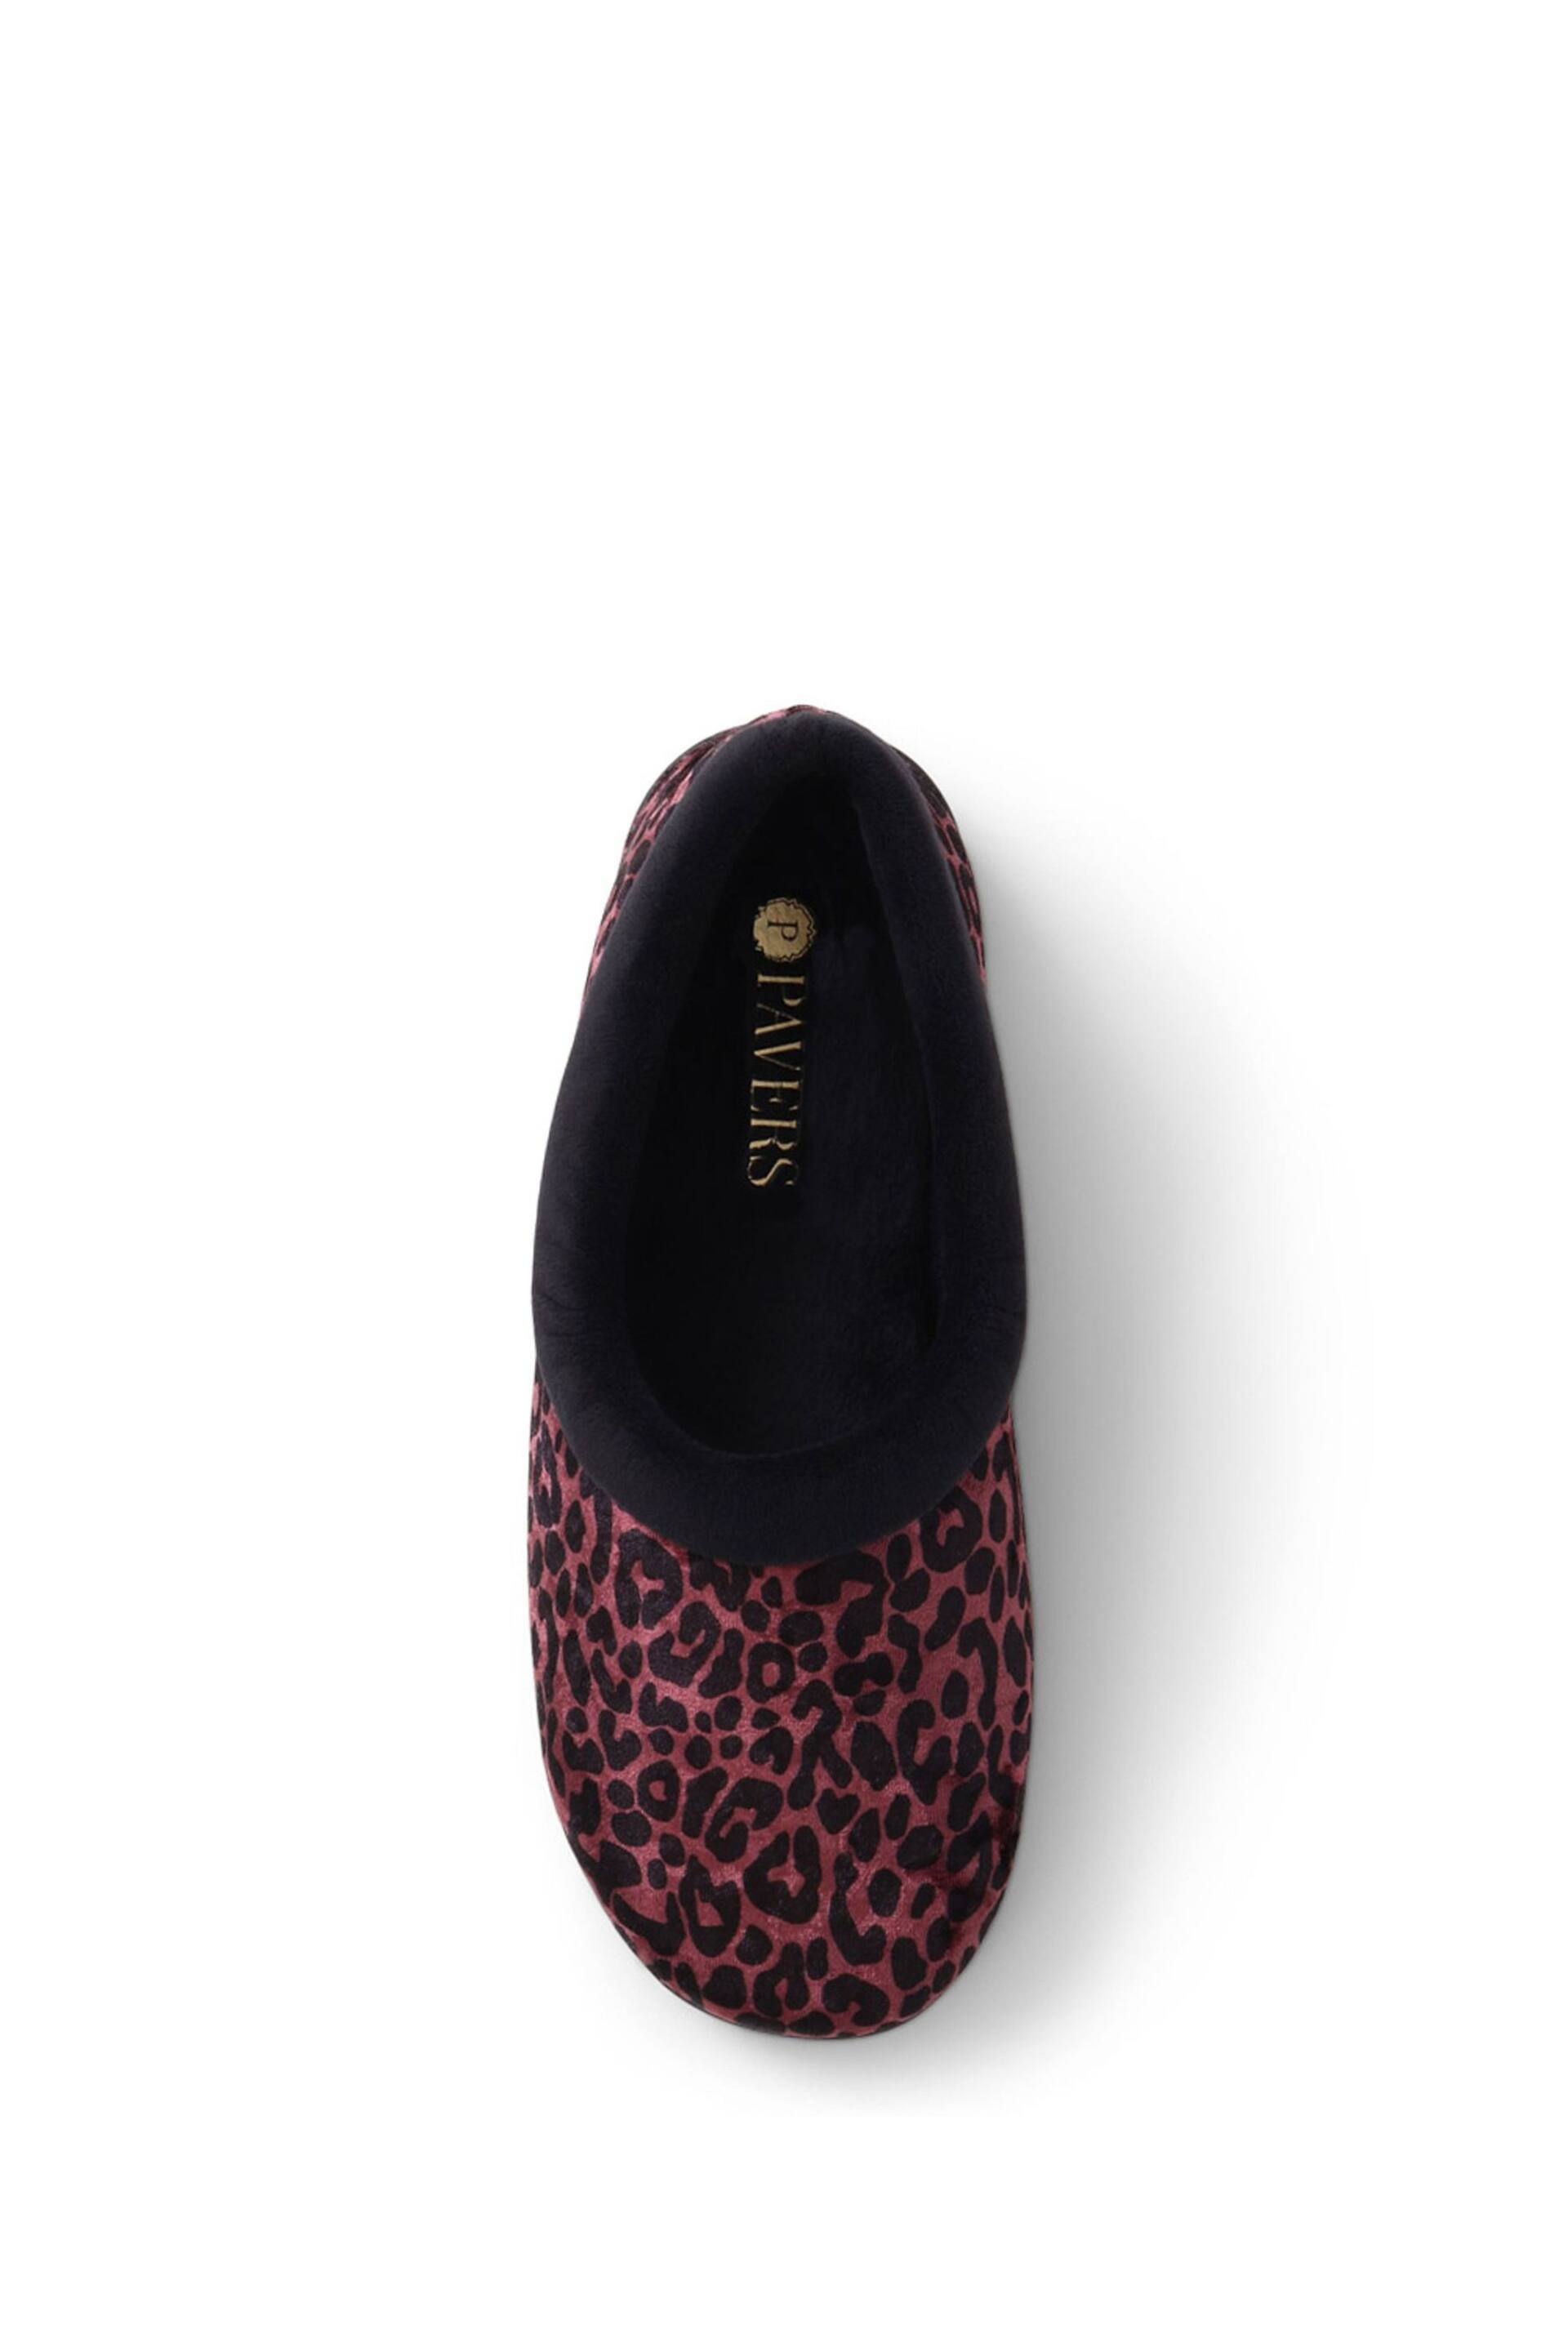 Pavers Red Leopard Print Casual Slippers - Image 4 of 5